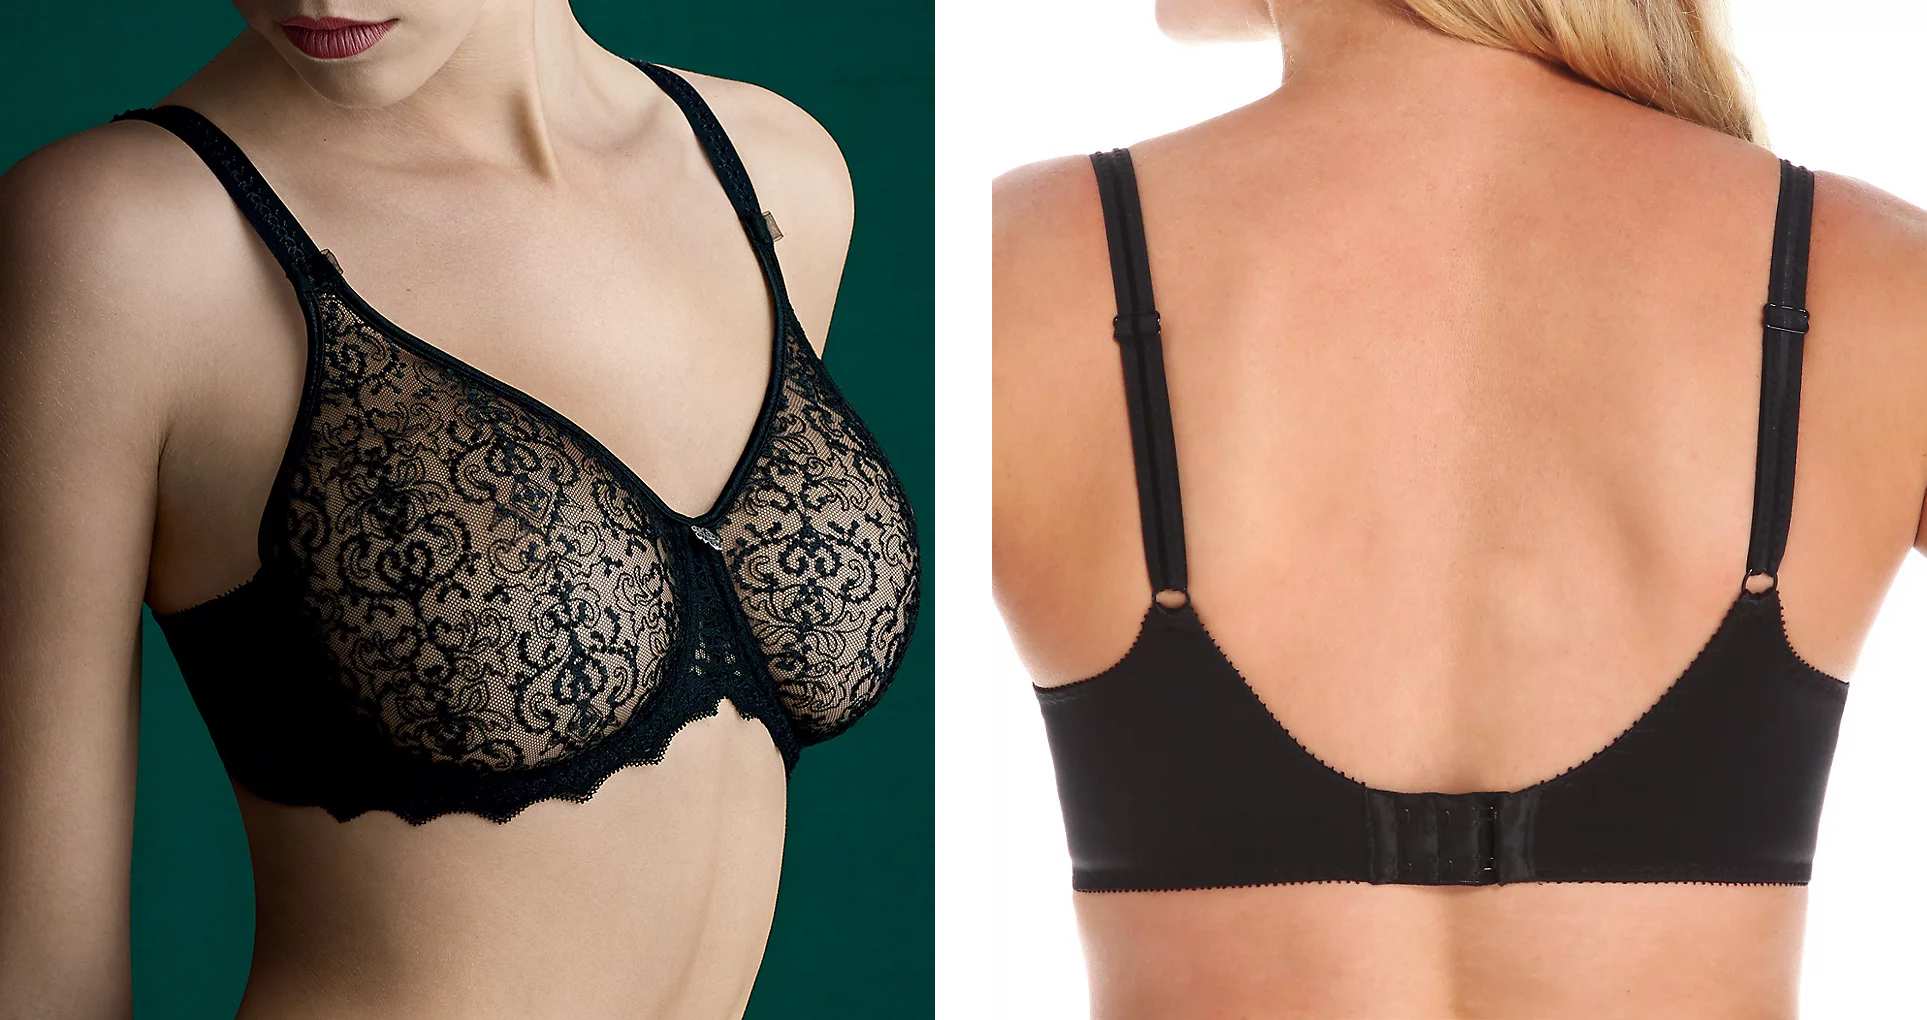 Plus size push up bras in black lace are so beautiful!